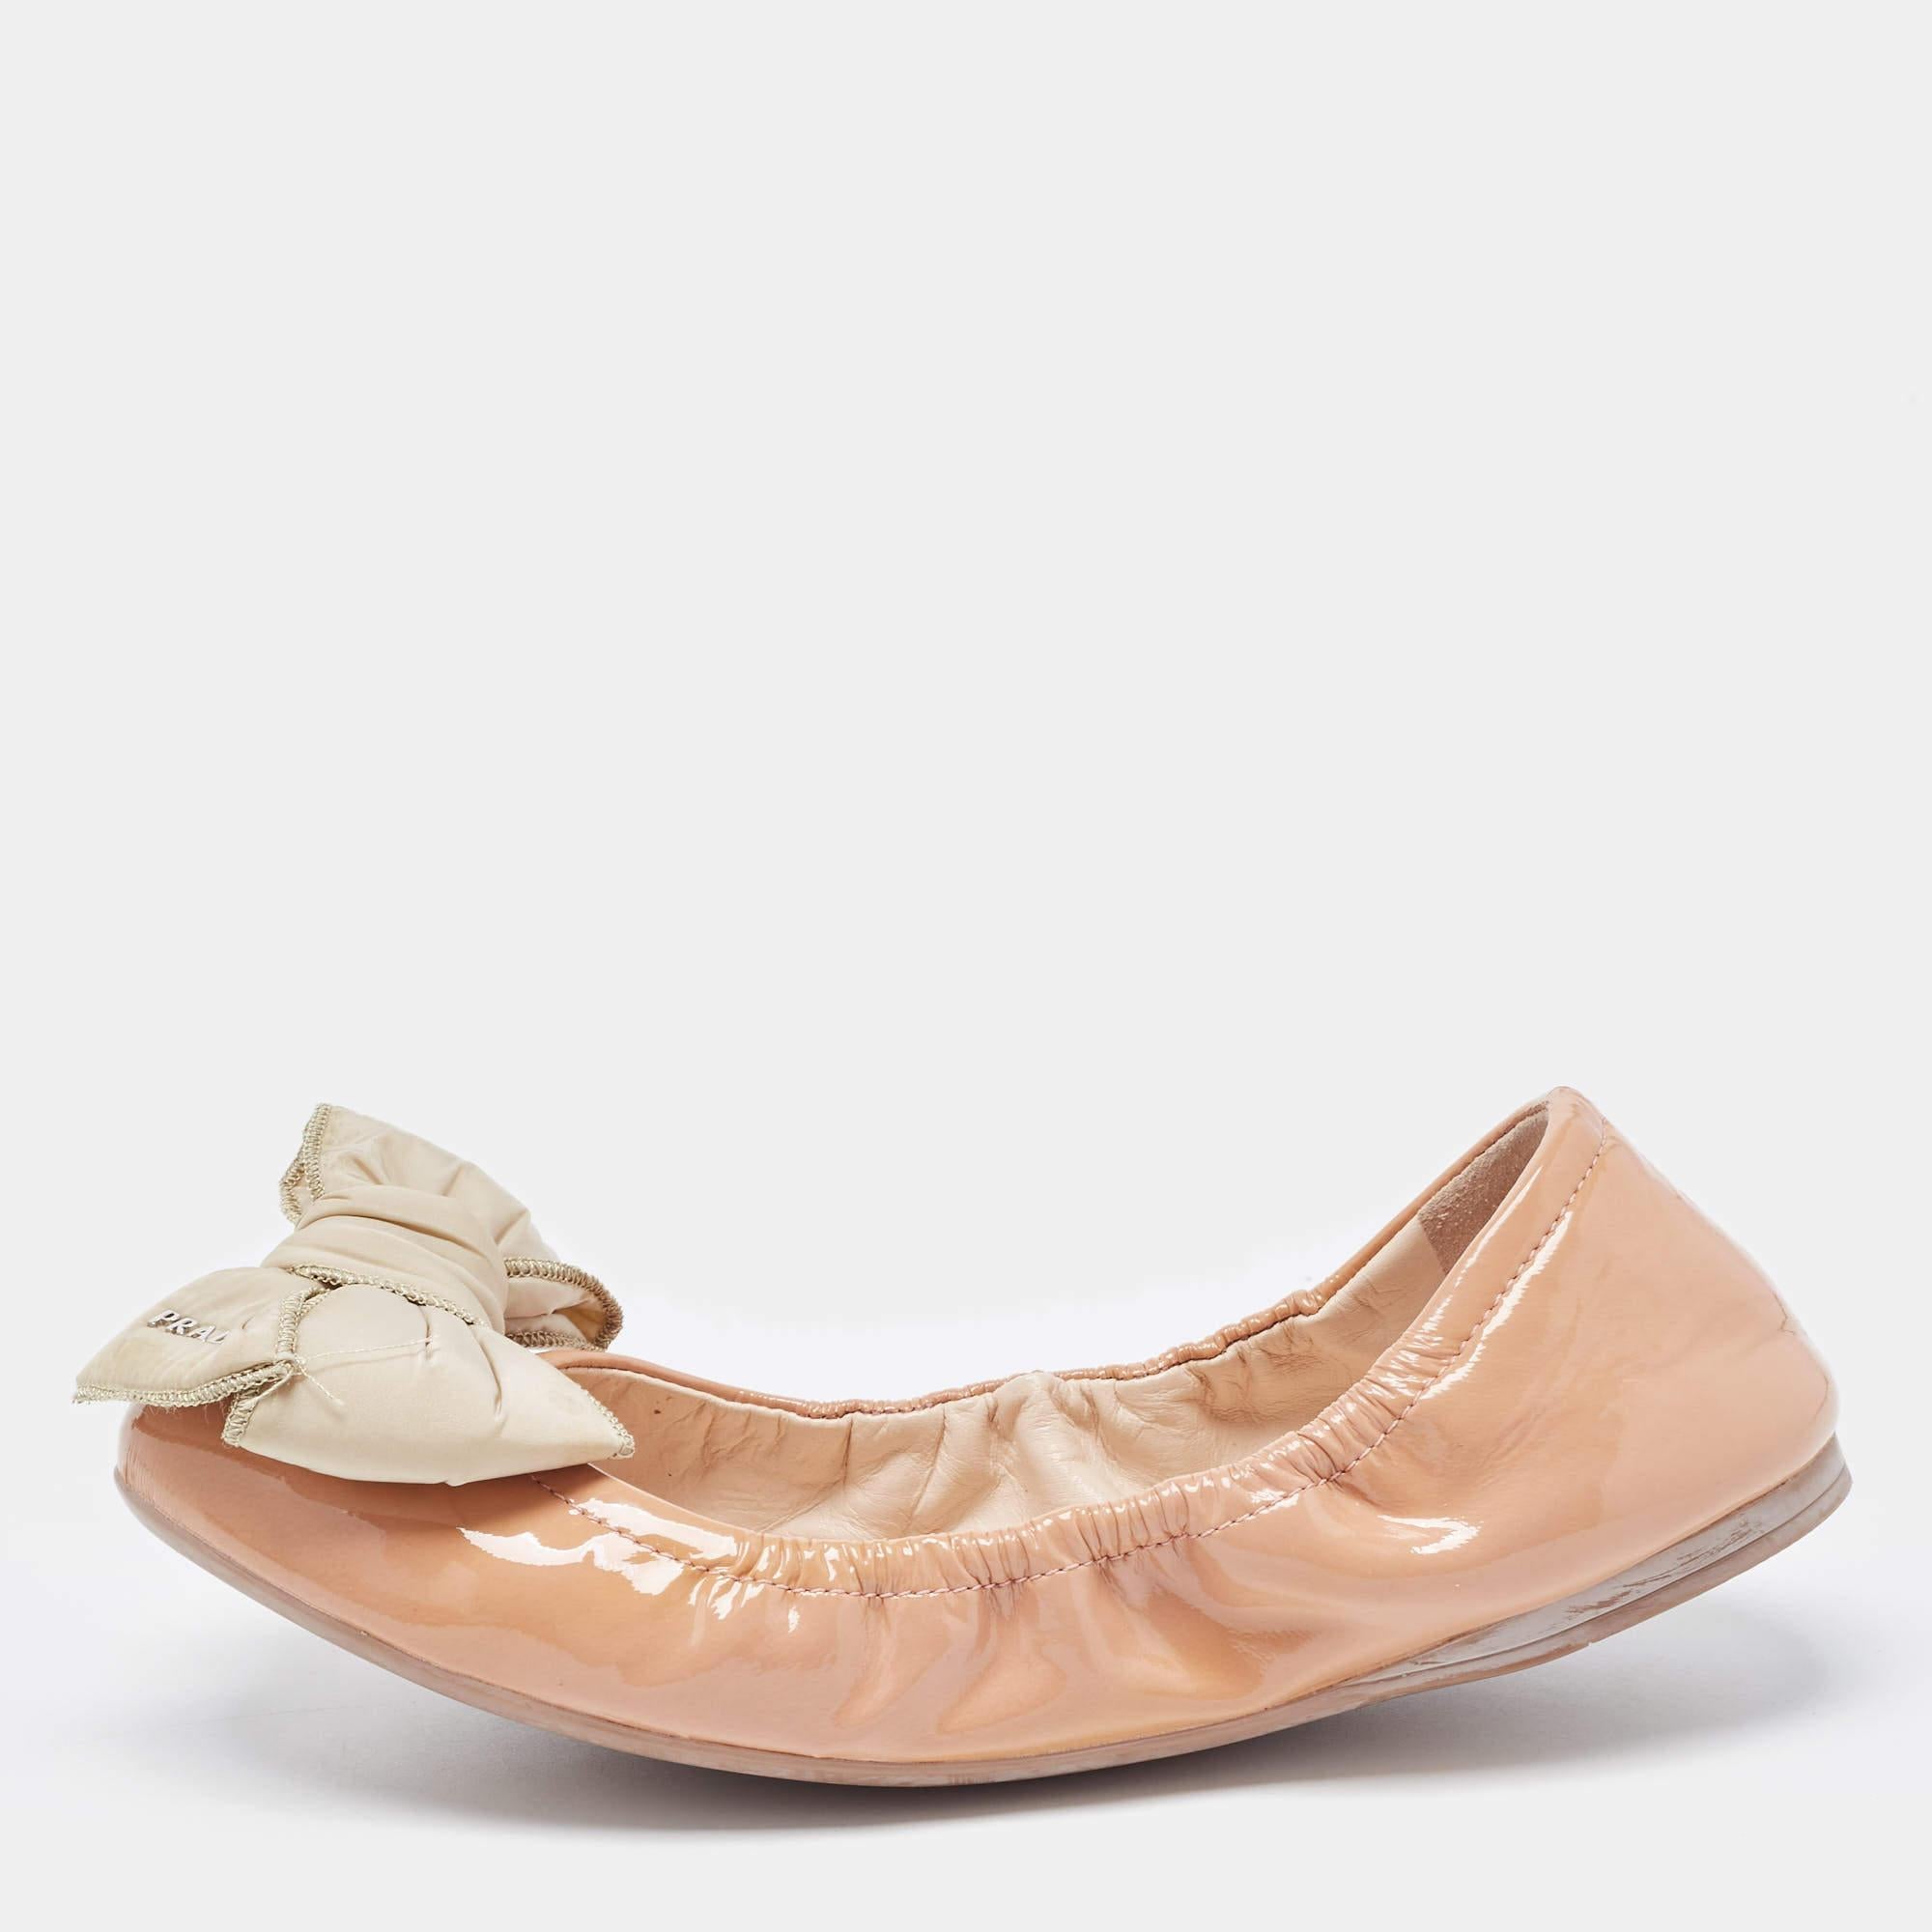 Prada Beige Patent Leather Bow Scrunch Ballet Flats Size 36.5 For Sale 2